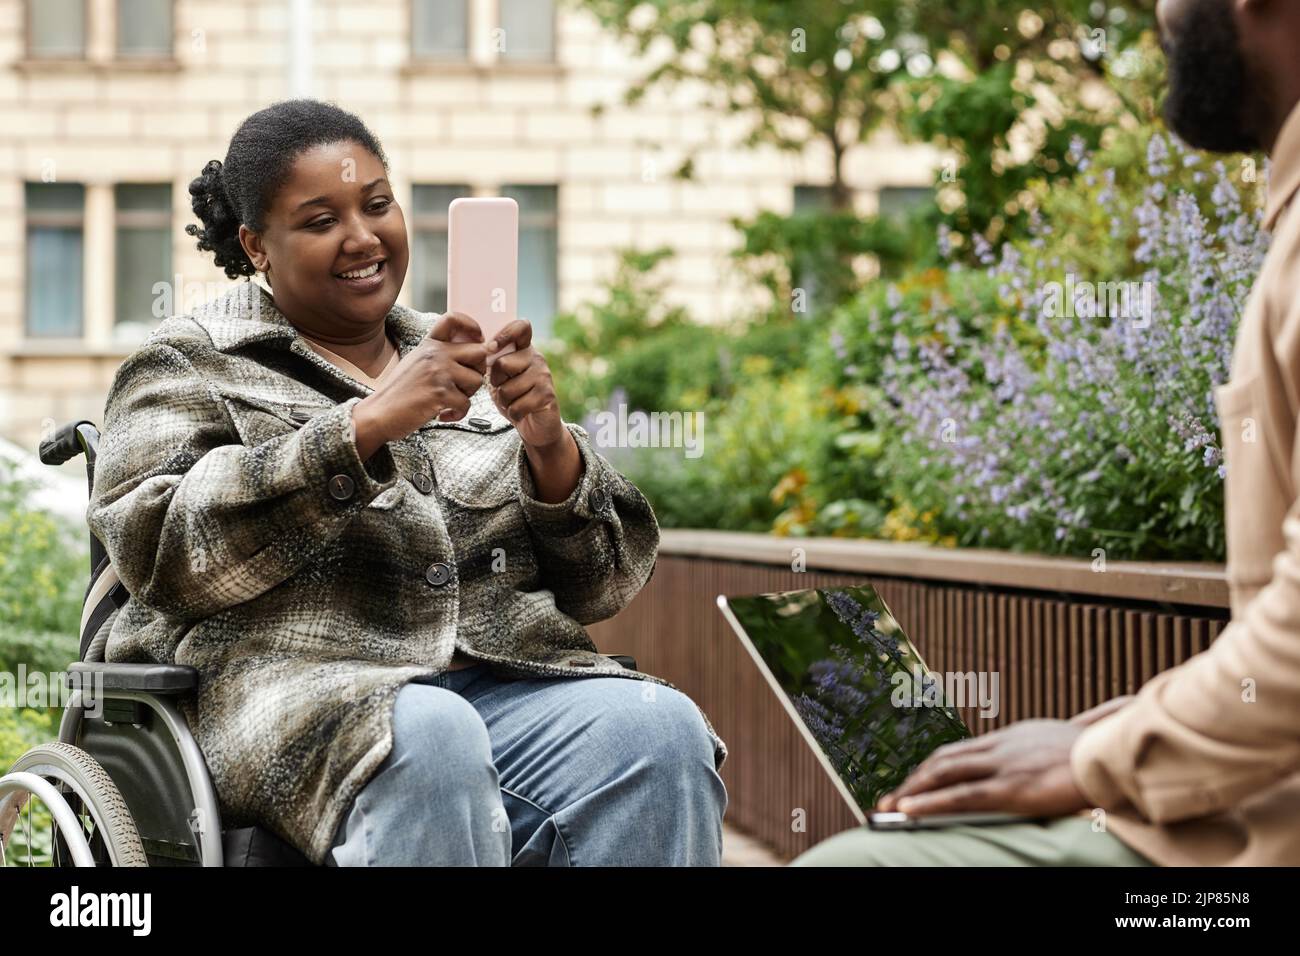 Portrait of smiling black woman in wheelchair taking mobile photo in city outdoors, copy space Stock Photo